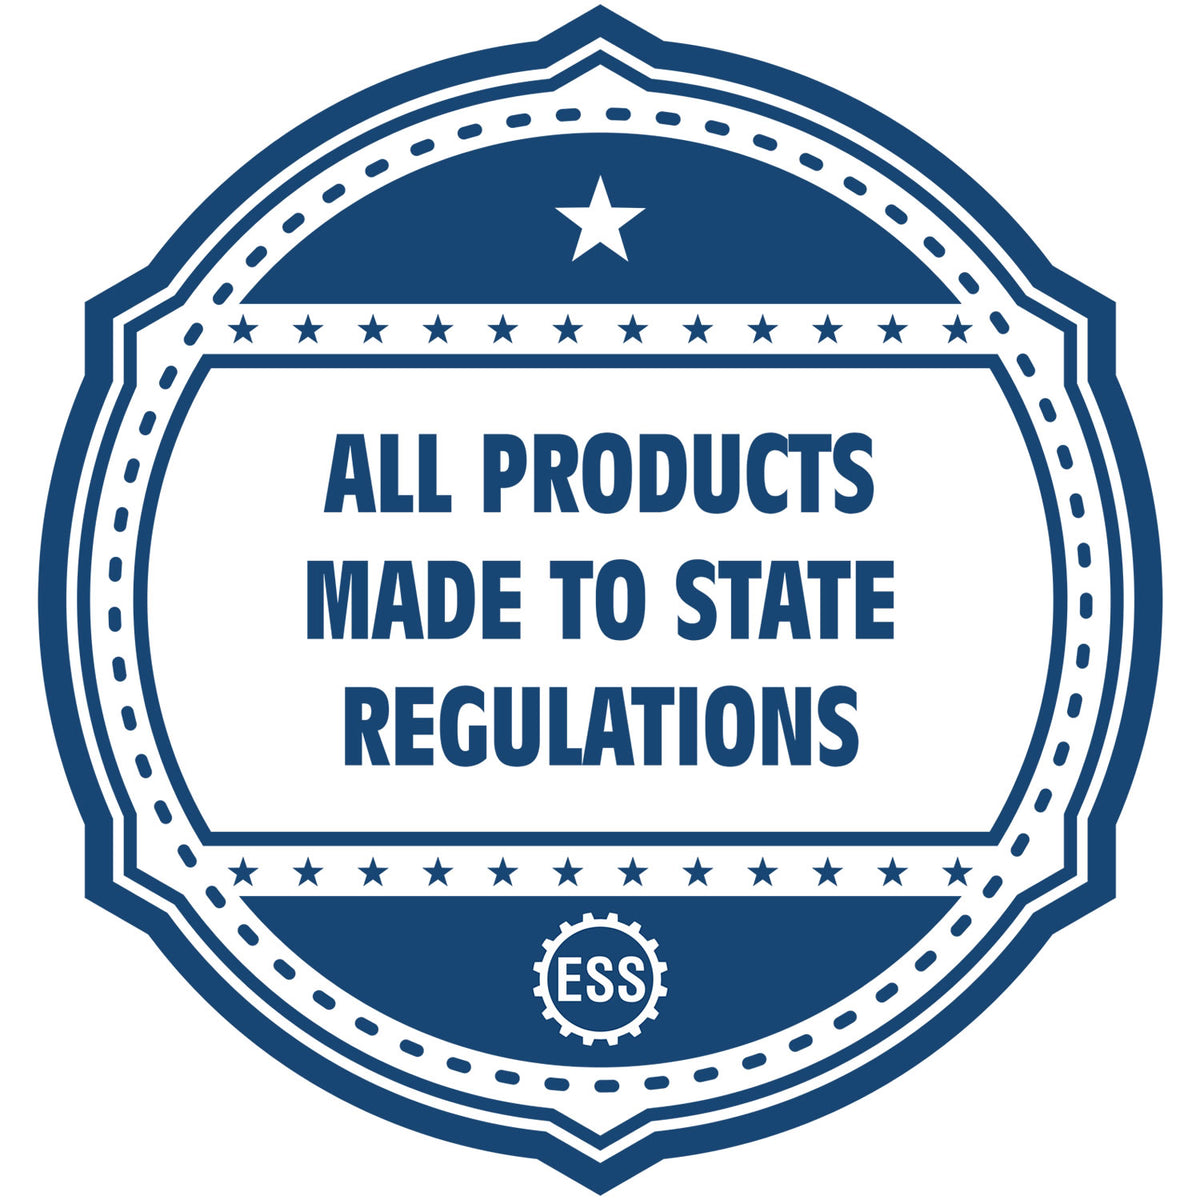 An icon or badge element for the Slim Pre-Inked Ohio Land Surveyor Seal Stamp showing that this product is made in compliance with state regulations.